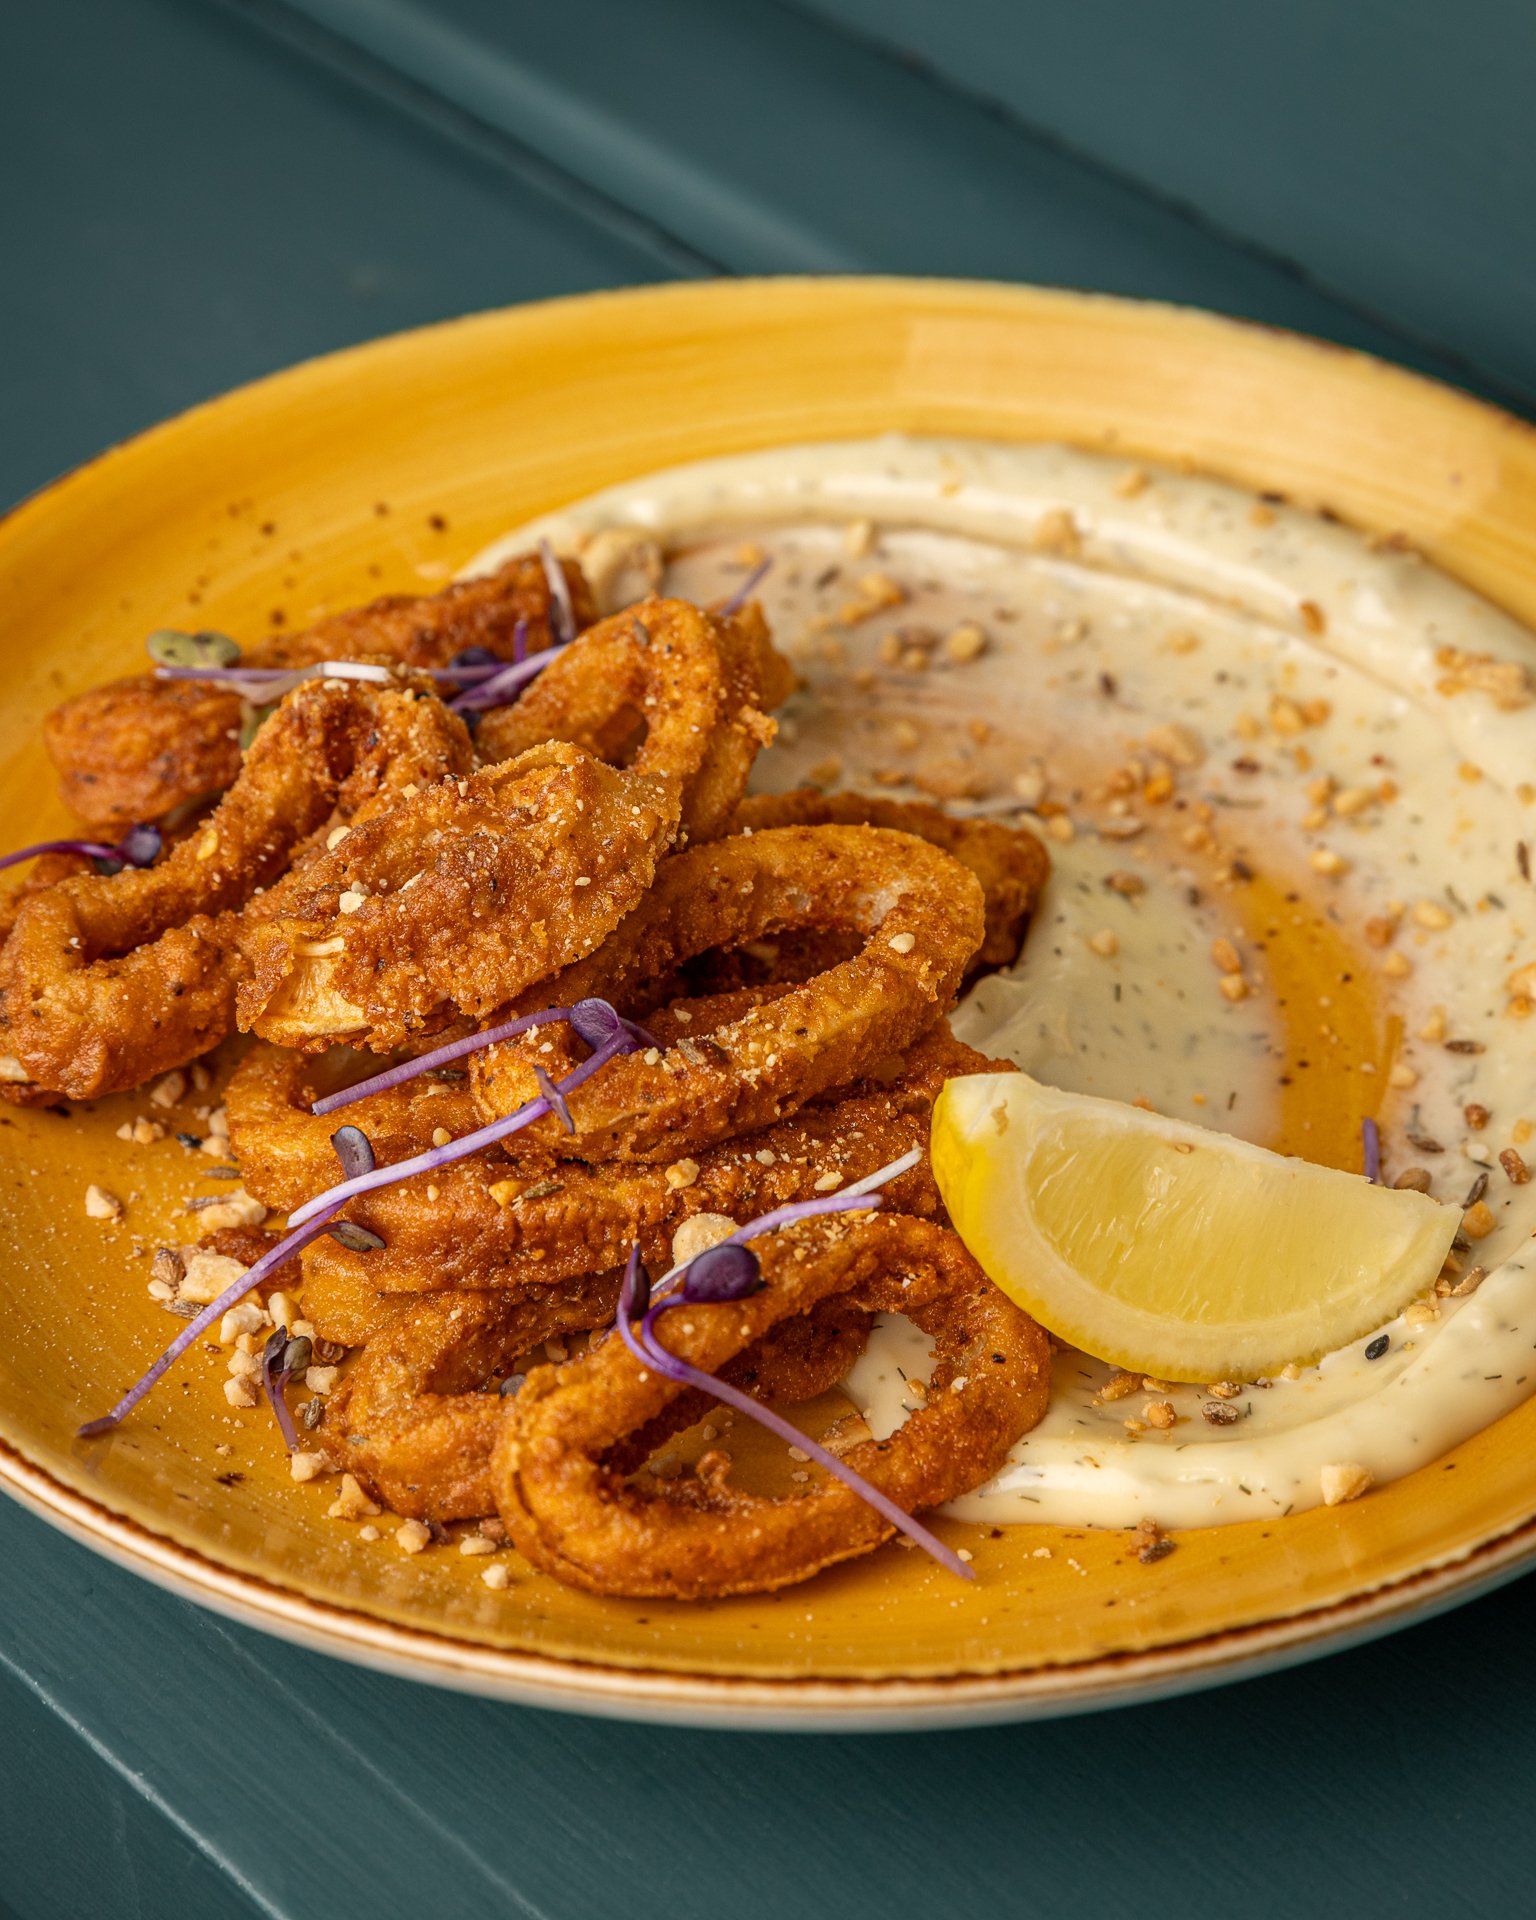 A NEW Calamari entr&eacute;e is on the way! 🦑 Don't let your drinks or your mains get lonely 😉 Crispy squid rings served with lemon aioli and dukkah 😋

Only at your home away from home in Mt Eden 🏡 View our menu and book ➡️ tap the link in our bi